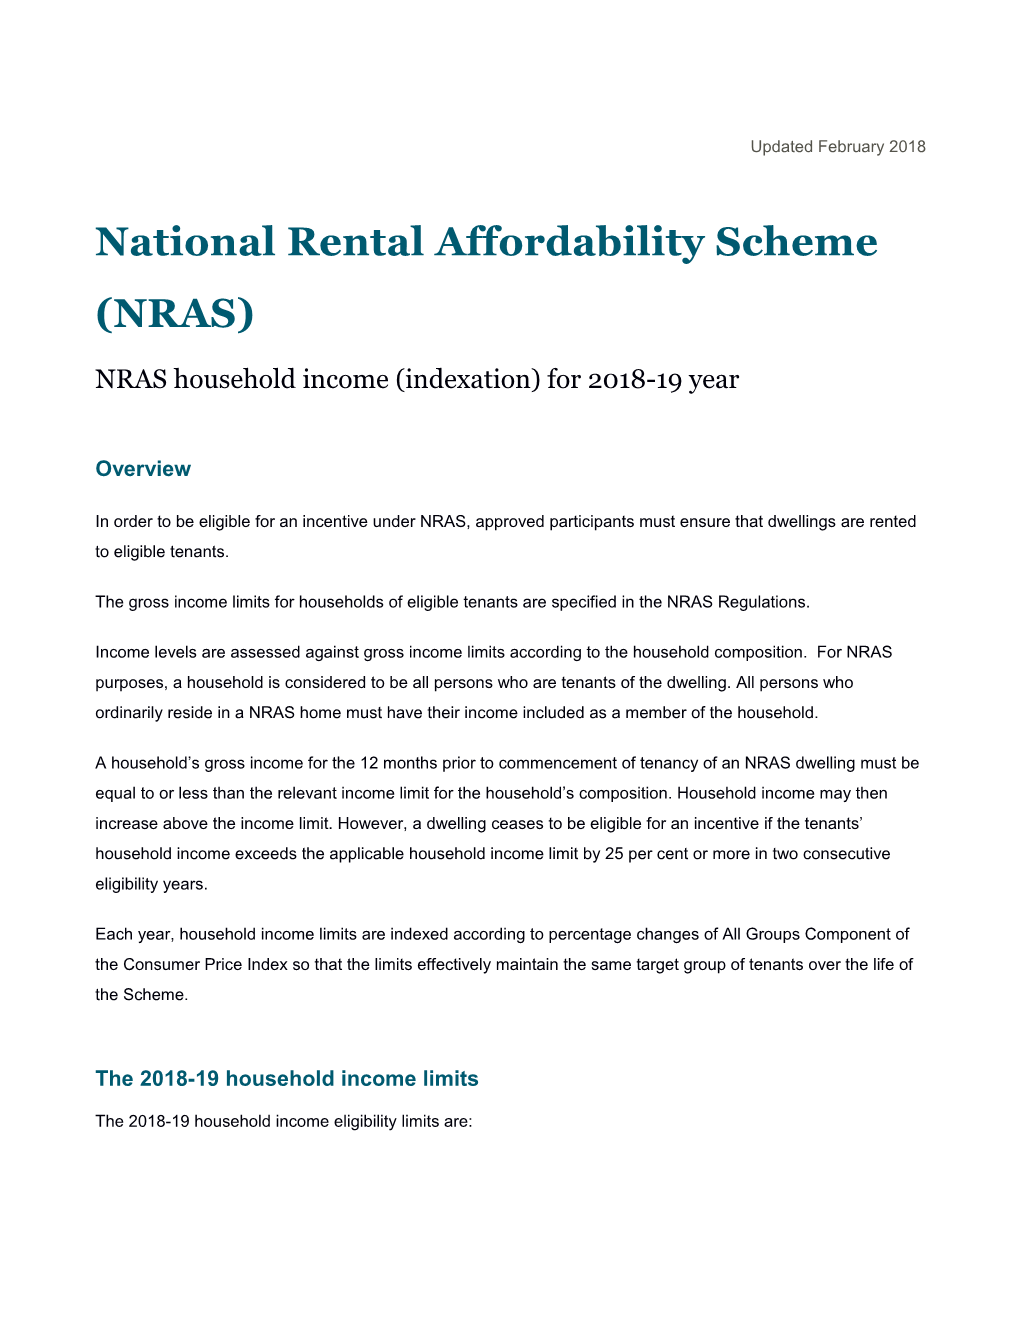 NRAS Household Income (Indexation) for 2018-19 Year